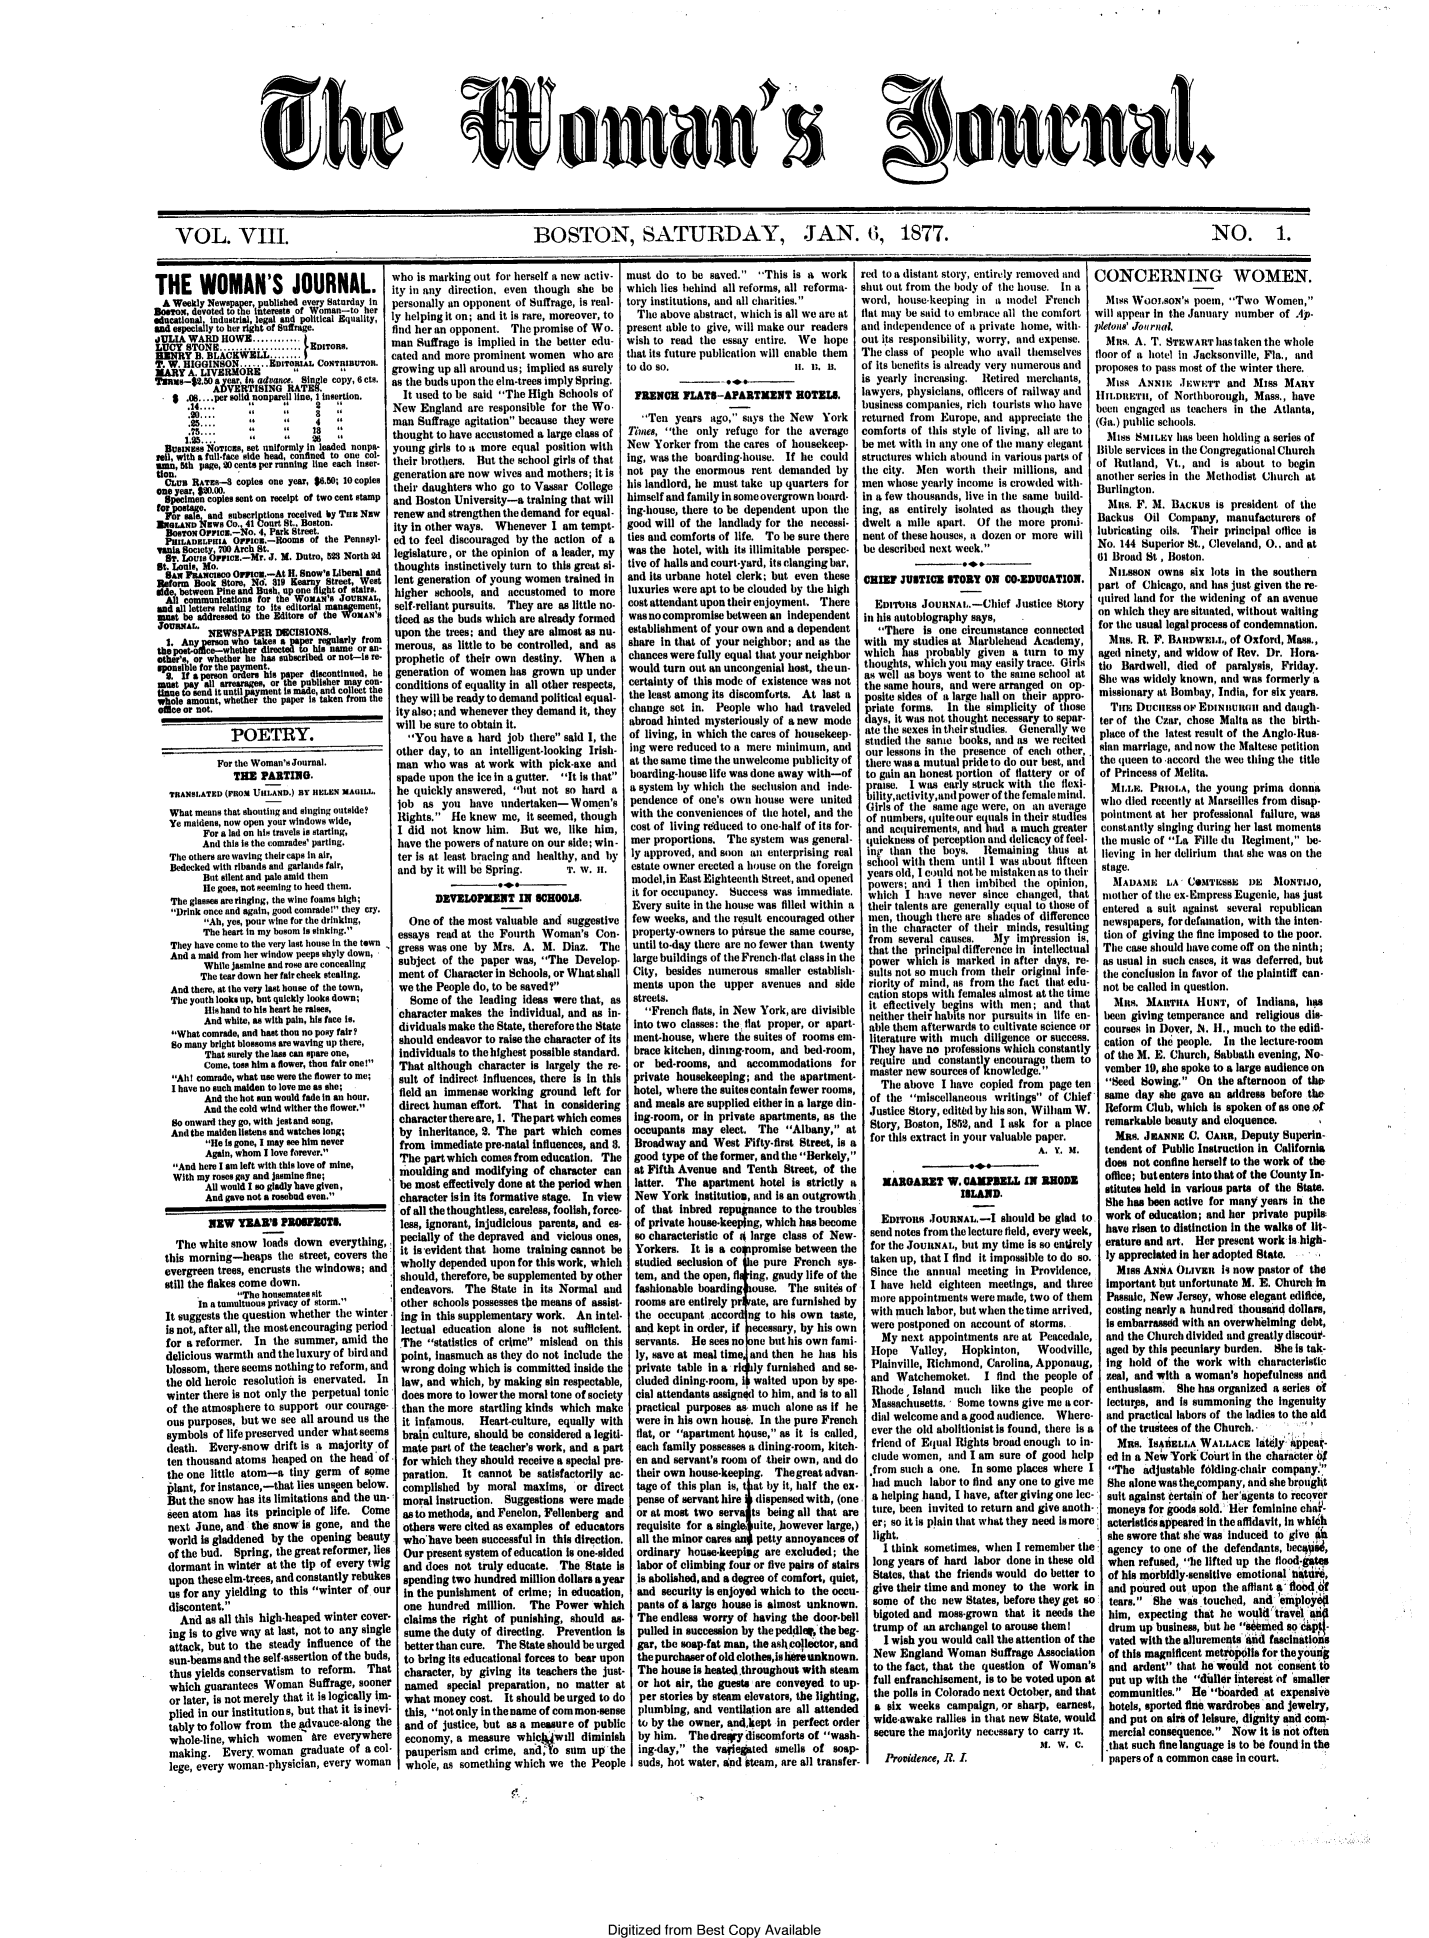 handle is hein.journals/wmjrnl8 and id is 1 raw text is: 










She


amanS


j surnL


VOL. VIII.                                                        BOSTON, SATURDAY, JAN. 6, 1877.                                                                                              NO. 1.


THE WOMAN'S JOURNAL. i
  A Weekly Newspar, published every Saturday in
Bos,   devtedl to 1,b0 interests of Woman-to her
      tlaal industrial, legalm ndtpolitical Equality,l
 adespeclly to her right of Sutrage.*f
             HowS........... EDITORS.     M
 HM   Y R. BLACKWELL........                c
 T. W. IGINSON    -   E..BITORIAL CoNsRIauTo.
 MARY A. LIVERMORE       11      1       g
 Tsams-$.50 aear, In advanT. Sinle copy, 6 cts.  a
           AVERTISING ATE.
    . 0.....per solid nonpareil line, I insertion.
       *14.-. ..2
       . ...                    8
       1*.2*5               26     1       t
  Buvmass Noricas,sset uniformly in leaded nonpa- y
Tel, with a full-face aide head, confined to one cl-
ma,   th page, 20 cents per running line eachnser-
tion.
  oUs  RATEsCopies one   year, $6.50; 10 copies  t
one year, $MO0.0.
  Speien  copies sent on receipt of two cent stampa
  tofr Al eand subscrltions received by Ta Nw r
  ENGLAND ws  Co., 41 ourt St., Boston.
  BOSO  ucs.-No.   4, Park Street.it
  PHILADELPIA O.   c.-Pooms of  the Penneyl- I
  Tata Society, 700 Arch St.
  8e. Louis Oe  .-Mr. J. M. Dutro, 582 North 2d l
  St. Louis, Mo.i
  Sam ru    com IOa  .-At H. Snow's Liberal and
  Reform Book Store, N. 19 Keat Street, West I
  sile between Pine and Bush, up oelight of stairs.
  ifl communications for the WOA'S JOUNAL,
  sad all letters relating to its editorial maagement,
  must be addressed to the Editors of the WoMAN's
  JoUaxLI. NEWSPAPER   DECISIONS.
  1. A     rson who takes a  r    larly from
  ueotof   ewheterdrce      ohisame  or n- I
  ther'sor whether e has ubscribed or noIsre
  Bpaible for the payment.
  a.  Ifa persn Orders is aerdsontinue, he
  mt. pay all arearges orepuIser C-
  tietowsnd ituntil yment Is mdancollt  th
  whe amount, whtr   the     pper   an  from the
  ose or not.i

               POETRY.

            For the Woman's Journal.n
               THE  PARTING.*
   TRANSLATED (FROM UHLAND.) BY HELEN MAGILL.
   What means that shouting and singing outside?
   Ye maidens, now open your windows wide,
         For a lad on hia travels is starting,
         And this is the comrades' parting.
   The others are waving their caps it air,
   Bedecked with ribands and garlands fair,
         Btt Silent and pae amid them
         Ie goes, not seeming tohead them.
   The glasses are ringing, the wine foams high;
   Drink once and again, good coinrade they cry.
          Ah, yes, pour wine for the drinking,
          The heart in my bosom is sinking.
   They have come to the very last house in the town
   And a mid from her window peeps shyly down,
         While jasmine and rose are concealing
         The tear down her fair cheek stealing.
   And there, at the very last house of the town,
   The youth looks up, but quickly looks down;
          His hand to his heart he raises,
          And white, as with pain, his faceIr?.
   What comrade, and bast thou no poy fair?
   So many bright blossoms are waving up there,
          That surely the lass can spare one,
          come, tass him a fower, thou fair one!
    Ah! comrade, what use were the flower to me;
    I have no sch maiden to love me as she;
         And the hot at would fade in at hour.
         And the cold wind wither the flower.
    So onward they go, with jestand song,
    And the maidenalistens and watches long;
          He Is gone, I mayose him never
          Again, whom I lov forever.
    And here I am left with this love of mine,
    With my roses gay and jasmine fe;
          All would I so gladly have given, I
          And gave not a rosebad even.

          NEW  TEA'S   PRO    ETIL
    The white snow   lads down  everything,
  this morning-heaps   the street, covers the'
  evergreen trees, encrusts the windows; and
  still the flakes come down.
            Inha   t nsemats it
         In a tomlto riam    storm.
   It suggests the question whether the winter.
   is not, after all, the most encouraging period
   for a reformer. In the summer,  amid  the
   delicious warmth and the luxury of bird and
   blossom, there seems nothing to reform, and
   the old heroic resolution is enervated. In
   winter there is not only the perpetual tonic
   of the atmosphere to support our courage-.
   ous purposes, but we see all around us the
   symbols of life preserved under what seems
   death.  Every-snow  drift is a majority of
   ten thousand atoms heaped on  the head of.
   the one little atom-a  tiny germ of some
   plant, for instance,-that lies unseen below.
   But the snow has its limitations and the un-
   seen atom has its principle of life. Come
   next June, and the snow  is gone, and the
   world Is gladdened by the opening  beauty.
   of the bud. Spring, the great reformer, lies
   dormant  in winter at the tip of every twig
   upon  these elm-trees, and constantly rebukes
   us for any yielding to this winter of. our
   discontent.
     And  as all this high-heaped winter cover-
   ing is to give way at last, not to any single
   attack, but to the steady Influence of the
   sun-beams and the self-assertion of the buds,
   thus yields conservatism to reform.  That
   which  guarantees Woman   Suffrage, sooner
   or later, is not merely that it is logically im-
   plied in our institutions, but that it is inevi-
   tably to follow from the advauce-along the
   whole-line, which women are everywhere
   making.   Every, woman  graduate  of a col-
   lege, every woman-physician, every woman


'ho is marking out for herself a new activ-I
ty in any direction, even though she  be,
ersonally an opponent of Suffrage, is real-I
y helping it on; and it is rare, moreover, to
ind her an opponent. The promise of Wo.I
man Suffrage is implied in the better edu-
ated and more prominent women   who  are
rowing  up all around us; implied as surelyI
s the buds upon the elm-trees imply Spring.
It used to be said The High  Schools of'
New England  are responsible for the Wo.
man Suffrage agitation because they were
hought to have accustomed a large class of
oung  girls to a more equal position with
their brothers. But the school girls of that
generation are now wives and mothers; It is
heir daughters who go  to Vassar College
and Boston University-a training that will
'enew and strengthen the demand for equal -
ty in other ways. Whenever   I am tempt-
ed to feel discouraged by the action of a
egislature, or the opinion of a leader, my
thoughts instinctively turn to this great si-
ent generation of young women  trained in
higher schools, and accustomed   to more
self-reliant pursuits. They are as little no-
ticed as the buds which are already formed
upon the trees; and they are almost as nu-
merous, as little to be controlled, and as
prophetic of their own destiny.  When  a
generation of women has grown  up under
codtions  of equality in all other respects,
they will be ready to demand political equal-
ity also; and whenever they demand it, they
will be sure to obtain It.
  You  have a hard job  there said I, the
other day, to an intelligent-looking Irish-
man  who  was at work  with pick-axe and
spade upon the ice in a gutter. It is that
he quickly answered,  hut not so hard  a
lob  as you  have  undertaken-  Women's
Rights.  He knew  me, It seemed, thought
I did not know   him.  But we,  like him,
have the powers of nature on our side; win  
ter is at least bracing and healthy, and by
and by it will be Spring.      T. W. H.

       DEVELOPMENT IN SCHOOLS.
  One  of the most valuable and suggestive
essays read at the Fourth  Woman's   Con-
gress was one by  Mrs. A.  M.  Diaz. The
subject of the paper  was, The  Develop.
ment  of Character in Schools, or What shall
we the People do, to be saved?
  Some  of the leading ideas were that, as
character makes  the Individual, and as in-
dividuals make the State, therefore the State
should endeavor to raise the character of Its
individuals to the highest possible standard.
That  although character Is largely the re-
sult of Indirect influences, there Is in this
field an immense working  ground  left for
direct human  effort. That in considering
character there are, 1. The part which comes
by  Inheritance, 2. The part which  comes
from  immediate pre-natal influences, and 8.
The  part which comes from education. The
moulding  and  modifying ofcharacter  can
be most  effectively done at the period when
character lain its formative stage. In view
of all the thoughtless, careless, foolish, force-
less, ignorant, Injudicious parents, and es-
pecially of the depraved and vicious ones,
it Is evident that home training cannot be
wholly depended  upon for this work, which
should, therefore, be supplemented by other
endeavors.   The State In  its Normal and
other  schools possesses the means of assist-
ing in this supplementary work.  An intel-
lectual education  alone is  not sufficient.
The   statistics of crime mislead on this
point, Inasmuch  as they do not include the
wrong   doing which is committed Inside the
law,  and which, by making sin respectable,
does  more to lower the moral tone of society
than  the more startling kinds which make
it infamous.   Heart-culture, equally with
brain  culture, should be considered a legiti-
mate  part of the teacher's work, and a part
for which  they should receive a special pre-
paration.   It cannot  be satisfactorily ac-
complished   by  moral maxims,   or direct
moral  instruction. Suggestions were made
as to methods, and Fenelon, Fellenberg and
others  were cited as examples of educators
whobave been successful  In  this direction.
Our  present system of education is one-sided
and  does  not truly educate. The  State is
spending  two hundred  million dollars a year
in  the punishment  of crime; in education,
one   hundred  million.  The Power  which
claims  the right of punishing, should  as-
sume   the duty of directing. Prevention is
better than cure. The  State should be urged
to  bring its educational forces to bear upon
character,  by giving its teachers the just-
named special preparation, no matter at
what   money cost.  It should be urged to do
this, not only inthename of common-sense
and   of justice, but as a measure of public
economy,   a measure  whic   will diminish
  pauperism and crime, and,To  sum  up th
  whole, as something which we  the People


must  do  to be saved.  This is a work
which  lies behind all reforms, all reforma-
tory institutions, and all charities.
  The  above abstract, which is all we are at
  present able to give, will make our readers
  wish to read the essay entire. We  hope
  that its future publication will enable them
  to do so.                      . u. U.

  IENC FLATS-APARTMENT ROTELS.
  Ten   years  ago, says the New   York
  Times, the only refuge for the average
  New Yorker from  the cares of housekeep-
  Ing, was the boarding-house. If he could
  not pay the enormous  rent demanded  by
  his landlord, he must take up quarters for
  himself and family insomeovergrown board-
  Ing-house, there to be dependent upon the
  good will of the landlady for the necessi-
  ties and comforts of life. To be sure there
  was the hotel, with its illimitable perspec-
  tive of halls and court-yard, its clanging bar
  and its urbane hotel clerk; but even these
  luxuries were apt to be clouded by the high
  cost attendant upon their enjoyment. There
  was nocompromise between an independent
  establishment of your own and a dependent
  share in that of your neighbor; and as the
  chances were fully equal that your neighbor
  would turn out an uncongenial host, theun-
  certainty of this mode of existence was not
  the least among its discomforts. At last a
  change set in. People  who  had traveled
  abroad hinted mysteriously of a new mode
  of living, in which the cares of housekeep-
  Ing were reduced to a mere minimum,  and
  at the same time the unwelcome publicity of
  boarding-house life was done away with-of
  a system by which the seclusion and inde-
  pendence of one's own house  were united
  with the conveniences of the hotel, and the
  cost of living reduced to one-half of its for-
  mer proportions. The system  was general-
  ly approved, and soon an enterprising real
  estate owner erected a house on the foreign
  model,in East Eighteenth Street, and opened
  it for occupancy. Success was immediate.
  Every suite in the house was filled within a
  few weeks, and the result encouraged other
  property-owners to pirsue the same course,
  until to-day there are no fewer than twenty
  large buildings of the French-flat class in the
  City, besides numerous  smaller establish-
  ments upon  the  upper avenues  and  side
  streets.
     'French flats, in New York, are divisible
  into two classes: the flat proper, or apart-
  ment-house, where the suites of rooms em-
  brace kitchen, dining-room, and bed-room,
  or  bed-rooms, and   accommodations   for
  private housekeeping; and  the apartment-
  hotel, where the suitesacontain fewer rooms,
  and meals are supplied either In a large din-
  ing-room, or In private apartments, as the
  occupants  may  elect. The  Albany,  at
  Broadway  and West  Fifty-first Street, is a
  good type of the former, and the Berkely,
  at Fifth Avenue and  Tenth  Street, of the
  latter. The  apartment hotel is strictly a
  New  York  Institution, and is an outgrowth
  of that inbred  repugnance to the troubles
  of private honee-keeping, which has become
  so characteristic of i large class of New-
  Yorkers.  It Is a c    rms     ewe     h
  studied seclusion of t pure  French  sys-
  tem, and the open, flIng, gaudy life of the
  fashionable boarding  ouse. The  suites of
  rooms are entirely pr ate, are furnished by
  the occupant  accord ng to his own  taste,
  and kept in order, if ecessary, by his own
  servants. He  sees no n  but his own fami-
  ly, save at meal time and then he has his
  private table In a ri ly furnished and se-
  cluded dining-room, I waited upon  by spe-
  cial attendants assigned to him, and is to all
  practical purposes as much  alone as If he
  were in his own house. In the pure French
  flat, or apartment house, as It is called,
  each family possesses a dining-room, kitch-
  en and servant's room of their own, and do
  their own house-keeping.  Thegreatadvan-
  tage of this plan is, at by it, half the ex-
  pense of servant hire I dispensed with, (one
  or at most two  serva s being all that are
  requisite for a singleuite, however large,)
  all the minor cares an petty annoyances of
  ordinary  house-keeping are excluded; the
  labor of climbing four or five pairs of stairs
  .Is abolished, and a degree of comfort, quiet,
  and  security is enjoyed which to the occu-
  pants of a large house is almost unknown.
  The  endless worry of having the door-bell
  pulled In succesion by the peddle, the beg-
I  gar, the soap-fat man, the asicollector, and
  the purchaser of old clothesis  unknown.
.  The house Is heatedthroughout with steam
   or hot air, the guests are conveyed to up
   per stories by steam elevators, the lighting,
   plumbing, and ventilation are all attended
   to by the owner, andkept in perfect orde
   by him.  The drery discomforts of wash
   ing-day, the vaie   ted smells of  soap-
   suds, hot water, and steam, are all transfer


red to a distant story, entirely removed and
shut out from the body of the house. In a
word,  house-keeping  in a model   French
flat may be said to embrace all the comfortm
and  independence of a private home, with-p
out its responsibility, worry, and expense.
The  class of people who  avail themselves  f
of its benefits is already very numerous andp
is yearly increasing.  Retired merchants,
lawyers, physicians, otficers of railway and
business companies, rich tourists who have
returned front Europe, and  appreciate the
comforts  of this style of living, all are to
be met with in any one of the many elegant
structures which abound  in various parts ofC
the  city. Men  worth  their millions, asld
men  whose  yearly income is crowded with-
In a few thousands, live in the same build-
ing,  as entirely isolated as though they
dwelt  a mile apart.  Of the more   prom-
nent of these houses, a dozen or more will
be  described next week.

CHRE JUSTICE STORY ON CO*EDUCATIO.

   Errtus   JoUnNAL.-Chief   Justice Storyt
 in his autobiography says,
    There is  one circumstance connected
 with  my studies at Marblehead Academy,
 which  has probably  given a  turn to my
 thoutghts which yot nay easily trace. Girl
 as well s boys went to te same  School t
 the same hours, and were arranged on op-
 posite sides of a large hall on their appro-
 priate forms.  In  the simplicity of those
 days, it was not thought necessary to separ-I
 ate  e sexestin their stktdies.  Generally we
 studied the sanme books, nd as we rectel
 our lessons in the presence of each other,
 there wasea mutual pride to do our best, and
 to gain an honest portion of flattery or of
   p ise. I was early struck with tae lexi-
   ilty,aCtivity,and power of the fealemind.
 Girls of the same age were, on an average
 of numbers, quitetour etals in their studies
 and  acquirements, and had a much  greater
 quickness of perception and delicacy of feel-
 Ing tan   the bys.   Remain  ing thus  at
 school witihthem  until I was toutfifteen
 years old, I could not be mistaken as to their
 powers;  and  I then imbibed the  opinion,
 which   I have  never since changed,  that
 their talents are generally equal to those of
 men,  though there are shades of difference
 in the character uOftheir minls, resulting
 from  several causes.  My   imression  is,
 that the principal difference In intellectual
 power   wlich Is marked  in after days, re-
 sults not so much from  their original Infe-
 riority of mind, as from the fact that edt-
 cation stops with females almost at the tite
 It efectively bens   with men;  and  that
 neither their habits nor pursuits in life en-
 able them  afterwards to cultivate science or
 literature with much  diligence or success.
 They  have  no professions which constantly
 require and   constantly encourage them to
 master new  sources of kiowledge. 
    The  above I have copled  from page ten
  of the miscellaneous writings of Chief
  Justice Story, editdd by his son, William W.
  Story, Boston, 1812i, and I ask for a place
  for this extract in your valuable paper.
                                 A. T. 5.

    NAROARET W. CAMPIELL IN1 RODE
                   IBLAND.

    EDrronS  JoURNAL-I should e glad to
  send notes from the lecture field, every week,
  for the JOURAL,  but my time is so etirely
  taken up, that I find it impossible to do so.
  Since the  annual meeting in  Providence,
  I have  held eighteen meetings, and three
  tore  appointments were made, two of them
  with much  labor, but when the time arrived,
  were postponed  on account of storms..
    My  next appointments  are at Peacedale,
  Hope    Valley,  Hopkinton,    Woodville,
  Plainville, Richmond, Carolina, Apponaug,
  and  Watchemoket. I find the people of
  Rhode,  Island  much   like the people of
  Massachusetts.  Some  towns give me a cor-
  dial welcome and a good audience.  Where-
  ever the old abolitionist is found, there is a
  friend of Equal Rights broad enough to in-
  clude women,   and I am sure of good help
  .from such a one.  In some places where  I
  had  much  labor to find any one to give me
  a helping hand, I have, after giving one lee-
  ture, been invited to return and give anoth-
  er; so it is plain that what they need is more
r  light.
3    I think sometimes, when I[remember  the
   long years of hard labor done in these old
   States, that the friends would do better to
.  give their time and money to the work in
   some of the new  States, before they get so
   bigoted and moss-grown  that it needs the
.  trump of an archangel to arouse them I
     I wish you would call the attention of the
   New  England Woman   Suffrage Association
   to the fact, that the question of Woman's
   full enfranchisement, Is to be voted upon at
   the polls in Colorado next October, and that
   a lix weeks  campaign, or sharp,  earnest,
r  wide-awake rallies in that new State, would
  secure the majority necessary to carry it.
                                M.   w. c.
    Providence, R. I.


Digitized from  Best  Copy   Available


CONCERNING WOMEN.
Miss  Woovtsox's  poem, Two   Women,
will appear In the January number of Ap-
petoal' Journa.
Ms. A. T. STEWART has taken the   whole
loor of a hotel in Jacksonville, Fla., and
proposes to pass most of the winter there.
Miss   ANNIE   JWuETT   and  Miss MARY
HItour, of Northborotgh, Mass., have
been engaged its teachers in tthe Atlanta,
(Ga.) public schools.
  M188 KSMILEY has been holding a series of
Bible services in the Congregational Church
of Rutland, Vt., and   is about to begin
another series in the Methodist Church at
Burlington.
  M1ns. F. M. BACKus  is president of the
Backus  Oil Company, manufacturers   of
lubricating oils. Their prinipal oic  Is
No. 144 Superior St., Cleveland, 0.. anti at
01 Broad St, Boston.
  NILSsoN  owns  six lots in the southern
part of Chicago, andi has just given the re-
quiret Ilandfor the widening of an avenue
on which they are situated, without waiting
for the usual legal process of condemnation.
  Mi.  R. F. BARDWECLL, of Oxford, Mass.,
aged ninety, and widow of Rev. Dr. Hora-
tio Bardwel.   died of paralysis, Friday.
She was widely known, and Ws  formerly a
missionary at Bombay, India, for six years.
  TIEi Ducinss  oir Enmiuuoi  and daugh-
ter of the Czar, chose Malta as the birth-
place of the latest result of the Anglo-Rus-
elai marriage, and now the Maltese petition
the queen to -accord tme wee thing the title
of Princess of Melita.
  MI.L.  PIOLA,   the young  prima donna
who  tiled recently at Marseilles from disap-
pointment  at her professional failure, was
constantly singing during her last moments
the music of La File  du Regiment,  be-
lieving in her delirium that she was on the
stage.
   MADAME LA CO6MTEsBE DE MONTIJO,
 mother of the ex-Empress Eugenic, has just
 entered a suit against several republican
 newspapers, for defamation, with the inten-
 tion of giving the fine imposed to the poor.
 The case should have come off on the ninth;
 as usual in such cases, it was deferred, but
 the conclusion In favor of the plaintiff can-
 not be called in question.
   M31s. MATInA   HUNT,   of Indiana, has
 been giving temperance and  religious dis-
 courses in Doer, N. H., much  to the edifi-
 cation of the people. In the lecture-room
 of the M. E. Church, Sabbath evening, No-
 vember  19, she spoke to a large audience on
 Seed  Bowing.  On  the afternoon of the
 same  day she gave an  address before th&
 Reform  Club, which is spoken of as one.of
 remarkable beauty and eloquence.
   Mas. JEANNEC   . CARn, Deputy Superin-
 tendent of Public Instruction in California
 does not confine herself to the work of the
 office; but enterseinto that of the County In-
 stitutes held in various parts of the State.
 She has been active for many years in the
 work  of education; and lier private pupils
 have risen to distinction in the walks of lit-
 erature and art. Her present work Is high-
 ly appreciated In her adopted State.
   Miss ANNA  OLIVER   is now pastor of the
 important but unfortunate M. E. Church In
 Passale, New  Jersey, whose elegant edifice,
 costing nearly a hundred thousand dollars,
 Is embarrassdd with an overwhelming debt,
 and the Church divided and greatly discoit-
 aged by this pecuniary burden.  She is tak-
 ing  hold of the work  with characteristic
 zeal, and with a woman's  hopefulness and
 enthusiasm.  She has organized a series of
 lectures, and Is summoning  the ingenuity
 and  practical labors of the ladies to the aid
 of the trustees of the Church. *
   Mns.  IBMIiELLA WALLACE   lat lya'ppea-
   ed in a New York Court in the character bf
   The adjustable f6lding-char company.'
   She alone was the company, and she broughlt
   suit against iertsi of heragents to recover
   moneys for goods sold. Her feminine cha-
   actersticeappeared in the affidavit, in whidh
   she swore that she was induced to give a
   agency to one of the defendants, beca,
   when refused, lie lifted up the flood-gae
   of his morbidly-sensitive emotional lattie
   and poured out upon the afflant a tloiu of
   tears. She was touched,  and em lo
   him, expecting that he wouldtravela
   drum up business, but he i sed so6
   vated with the alluremets ill fascinations
   of this magnificent metIopolIs for theyousg
   and ardent that he would not consent tb
   put up with the duller interest of 'smaller
   communities. He boarded   at expensive
   hotels, sported fine wardrobes and jewelry,
   and put on airs of leisure, dignity and com-
   mercial consequence. Now  it is not often
 .that such fine language Is to be found inathe
 papers of a common  case in court.


.  .    .  I


